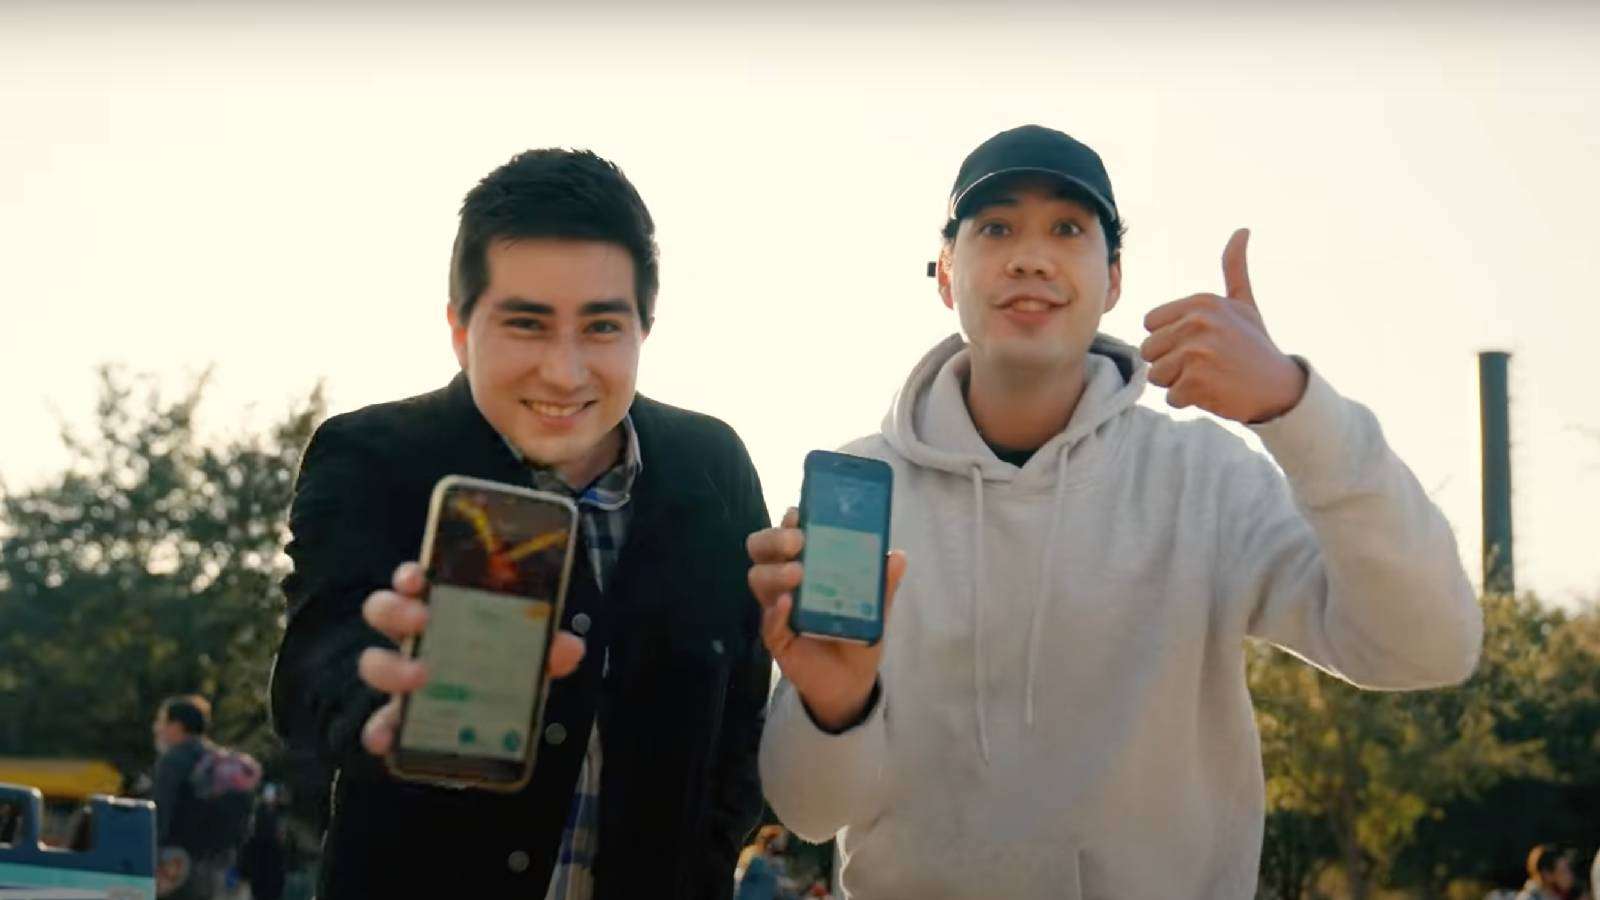 Two Pokemon Go fans hold up their phones with rare Pokemon shown on the screens